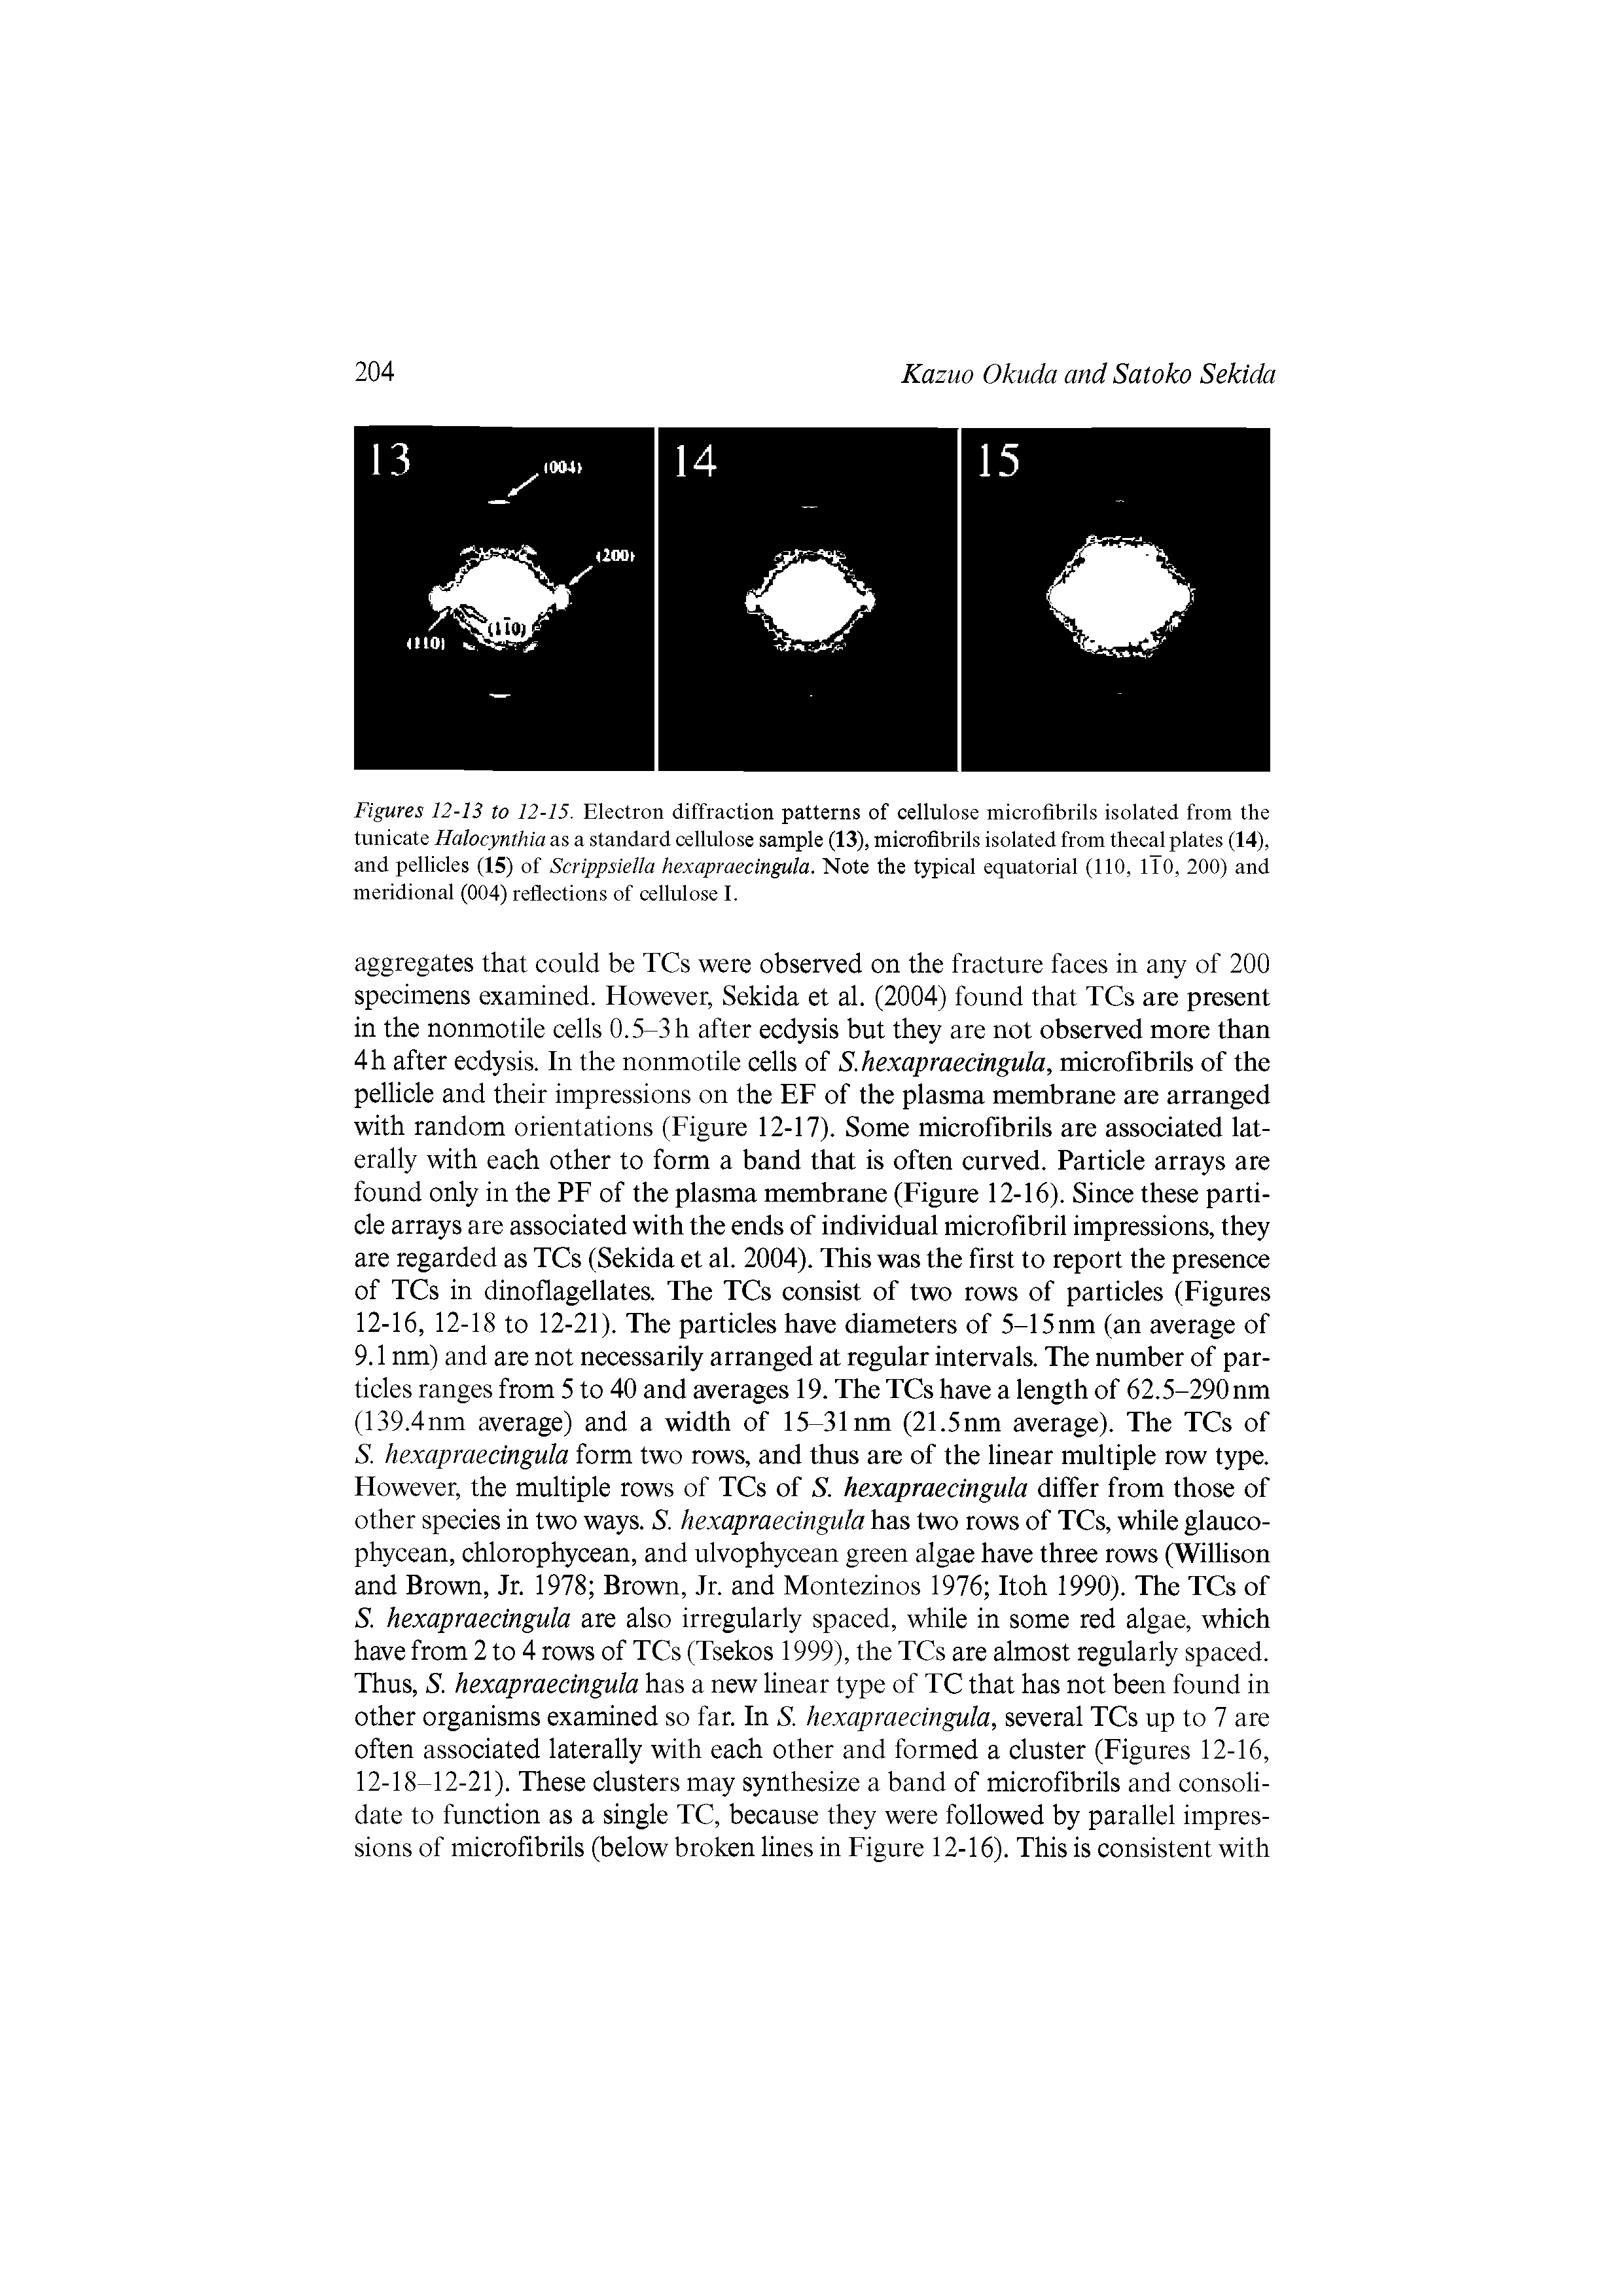 Figures 12-13 to 12-15. Electron diffraction patterns of cellulose microfibrils isolated from the tunicate Halocynthia as a standard cellulose sample (13), microfibrils isolated from thecal plates (14), and pellicles (15) of Scrippsiella hexapraecingula. Note the typical equatorial (110, iTO, 200) and meridional (004) reflections of cellulose I.